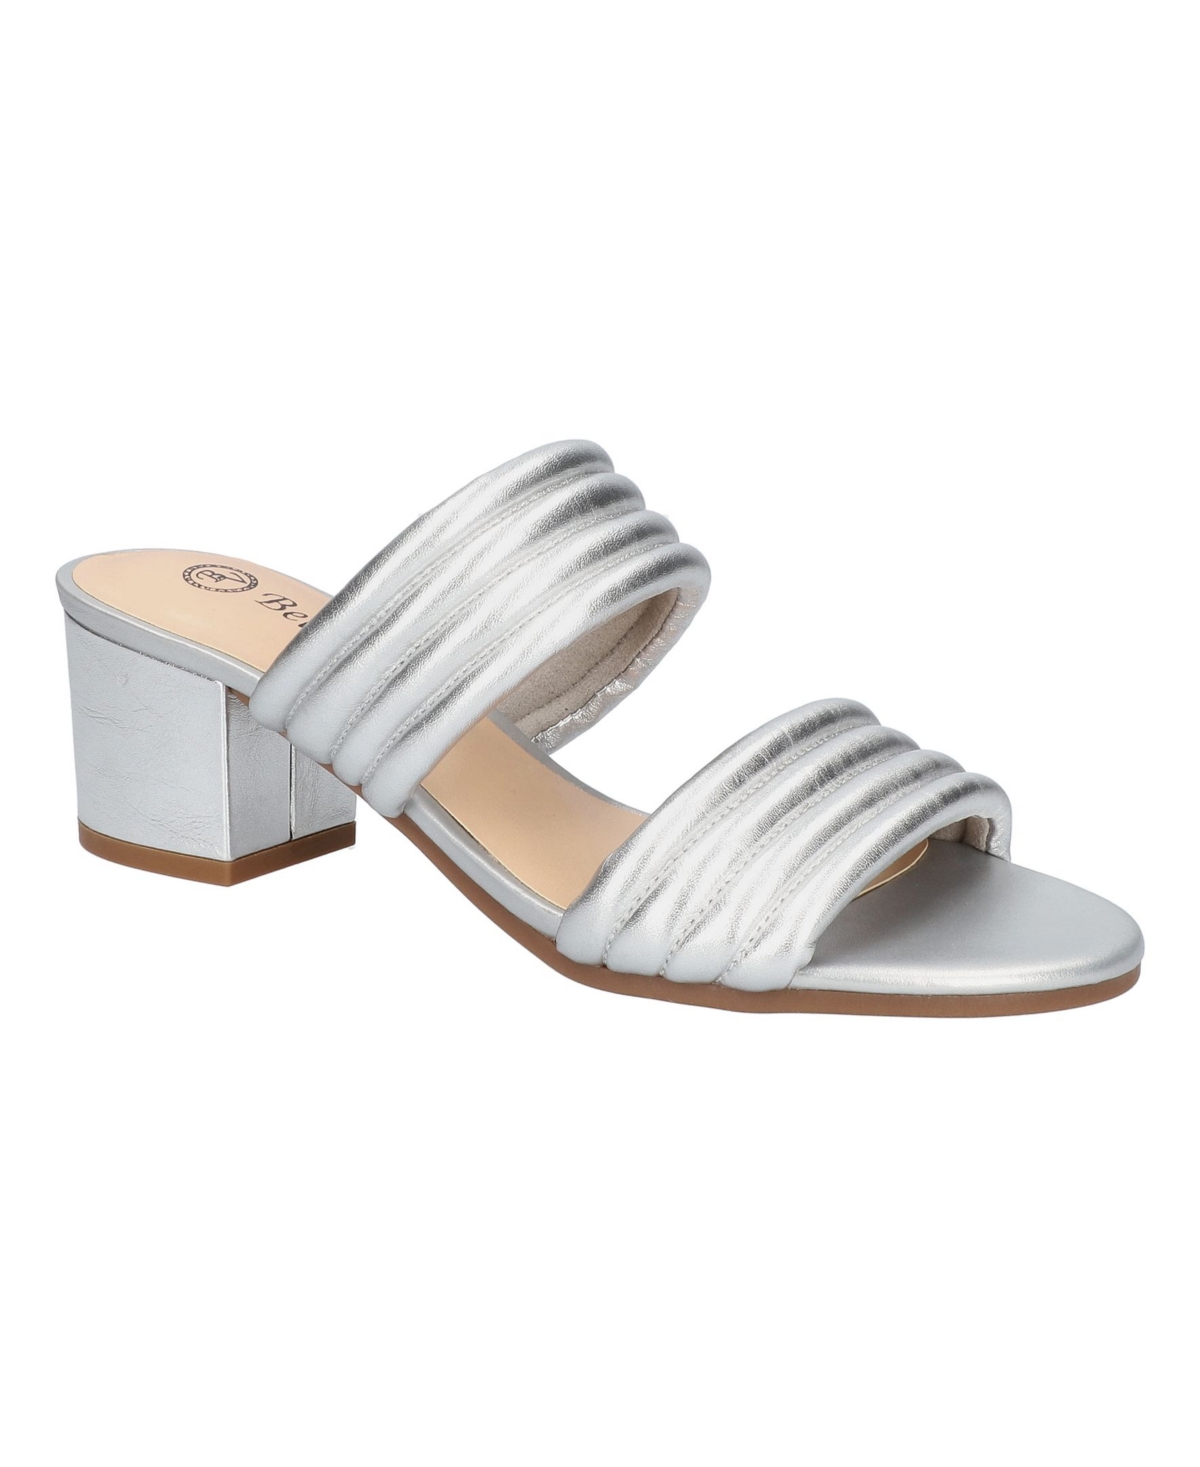 Women's Georgette Heeled Sandals - Silver Leather